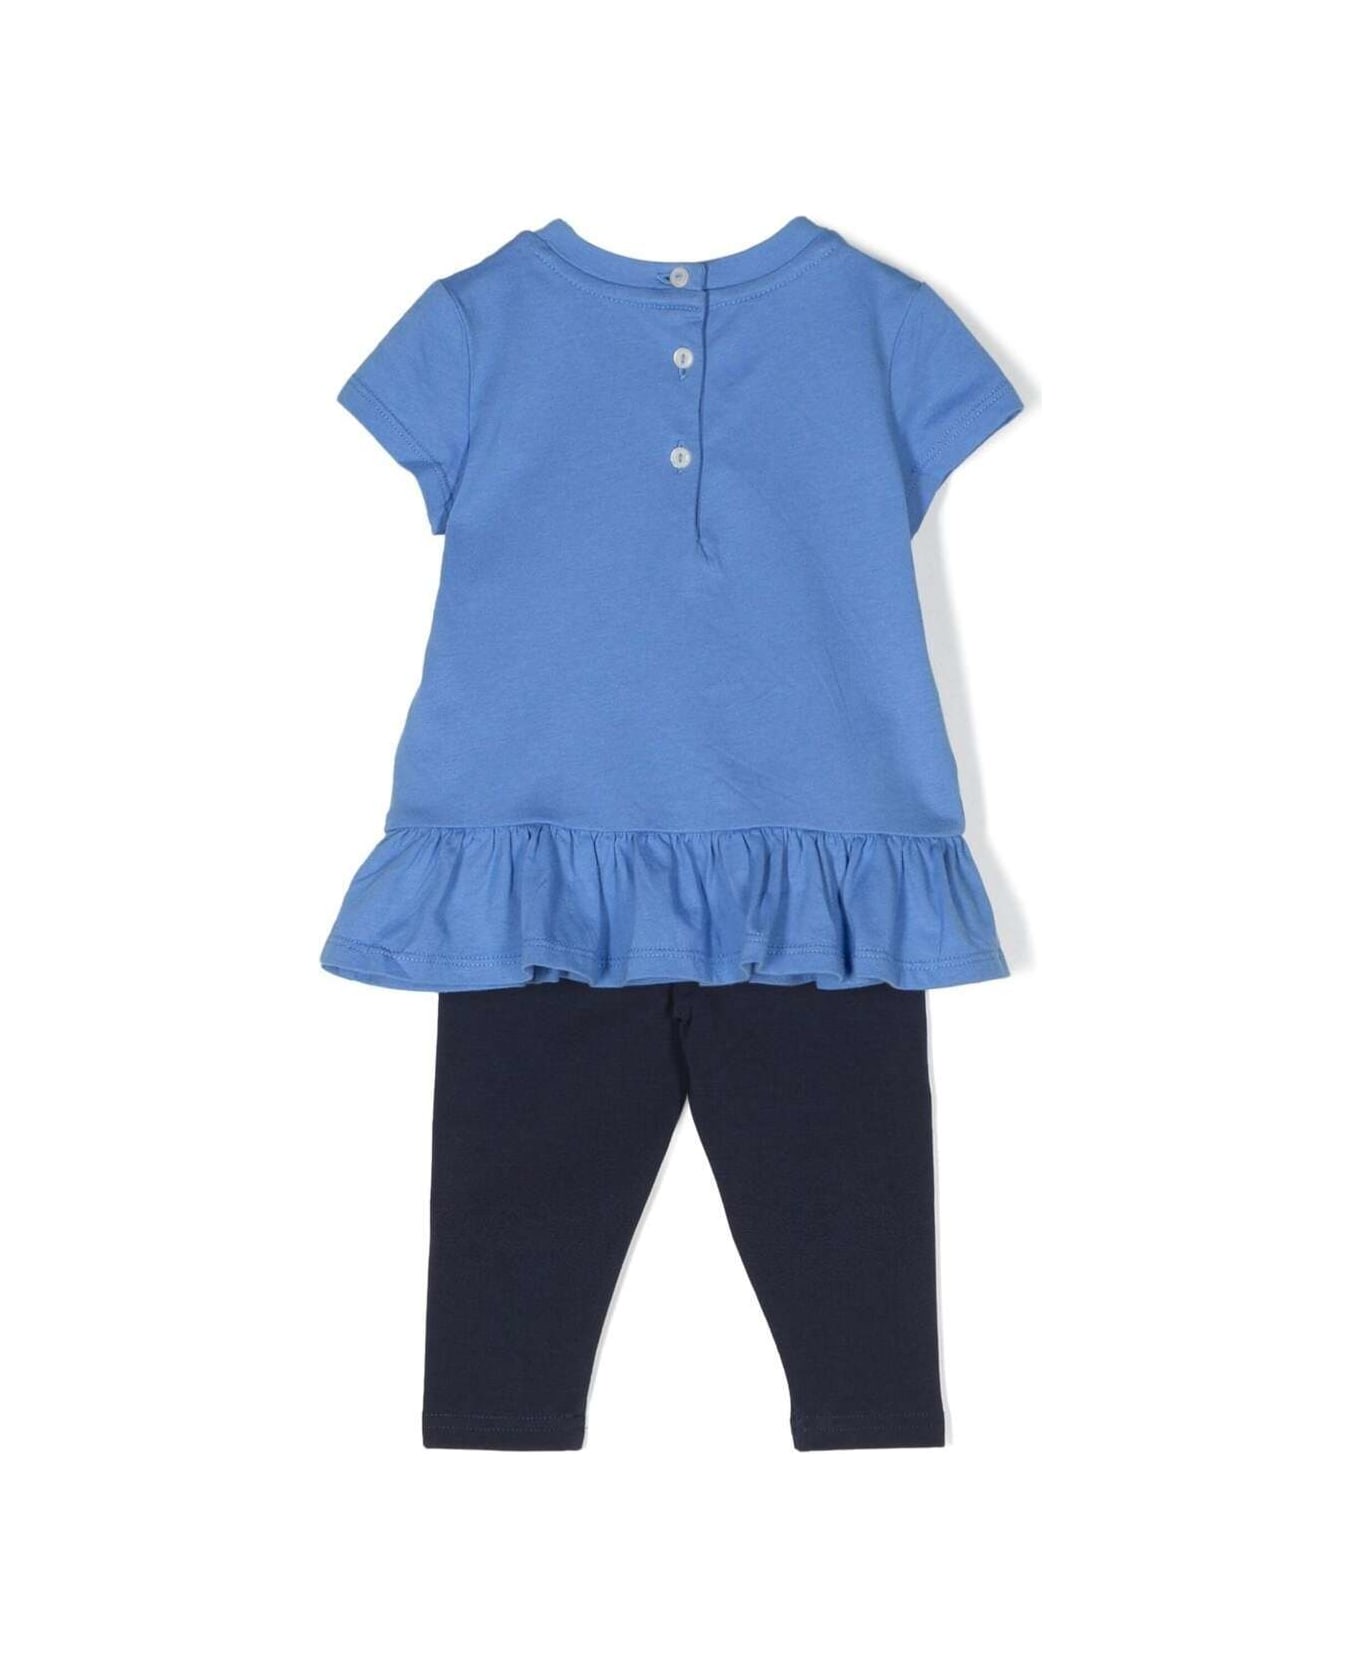 Polo las Ralph Lauren Blue And Black Set With Top And Leggings With Teddy Bear Print In Cotton Baby - Blu